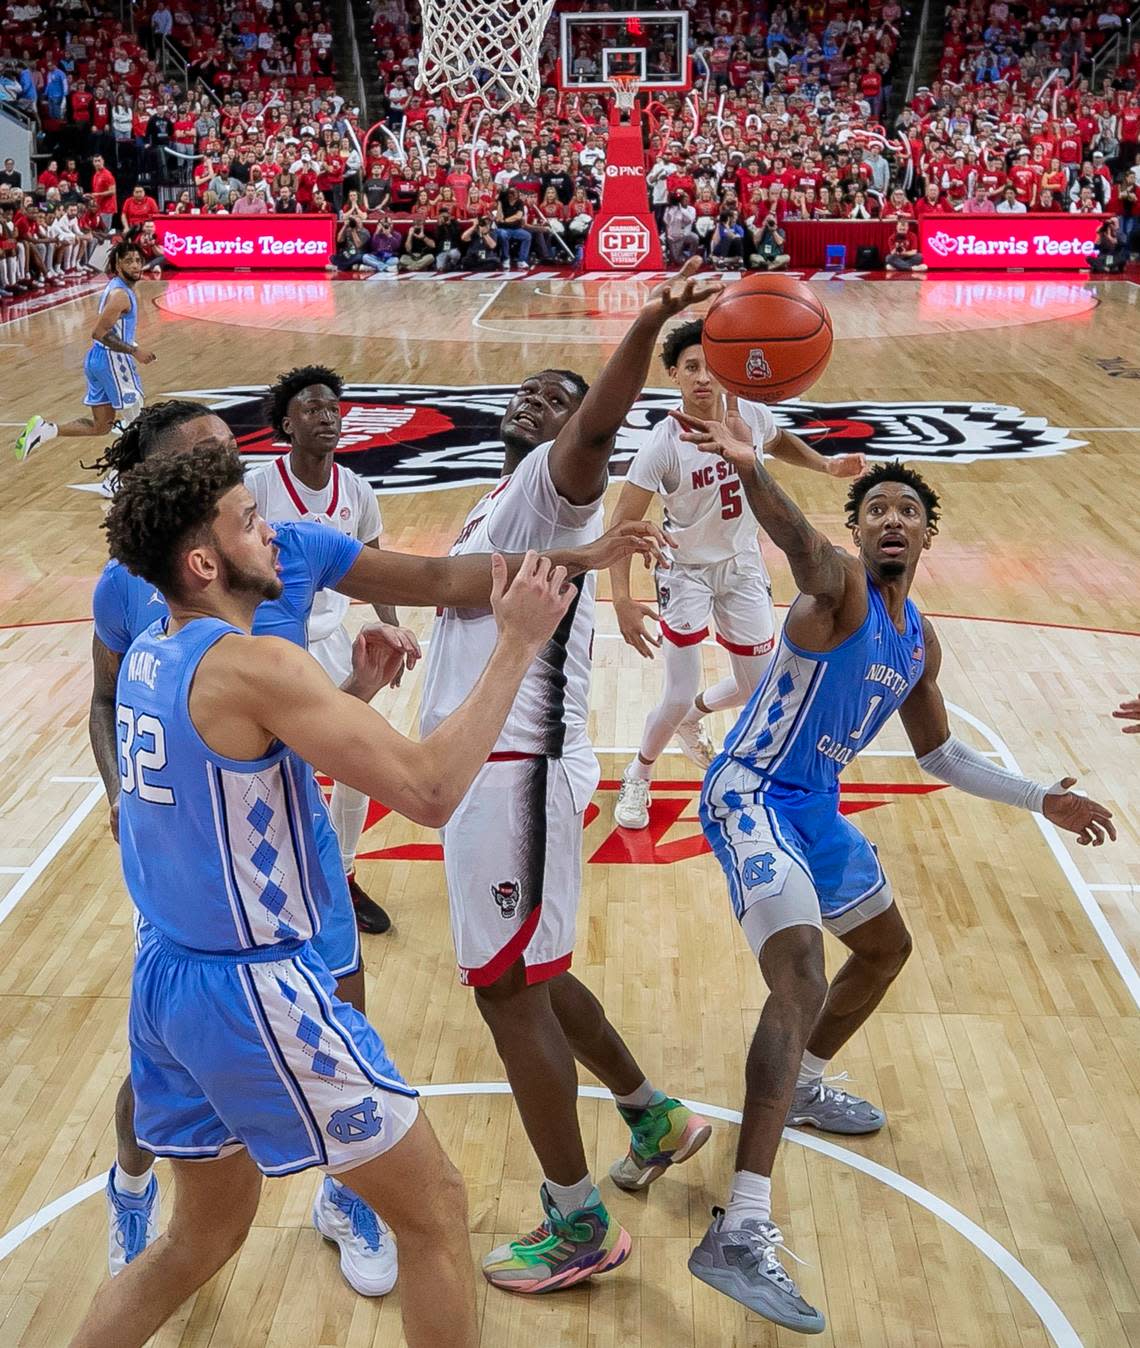 North Carolina’s Leaky Black (1) and N.C. State’s D.J. Burns (30) battle for a rebound in the second half on Sunday, February 19, 2023 at PNC Arena in Raleigh, N.C.